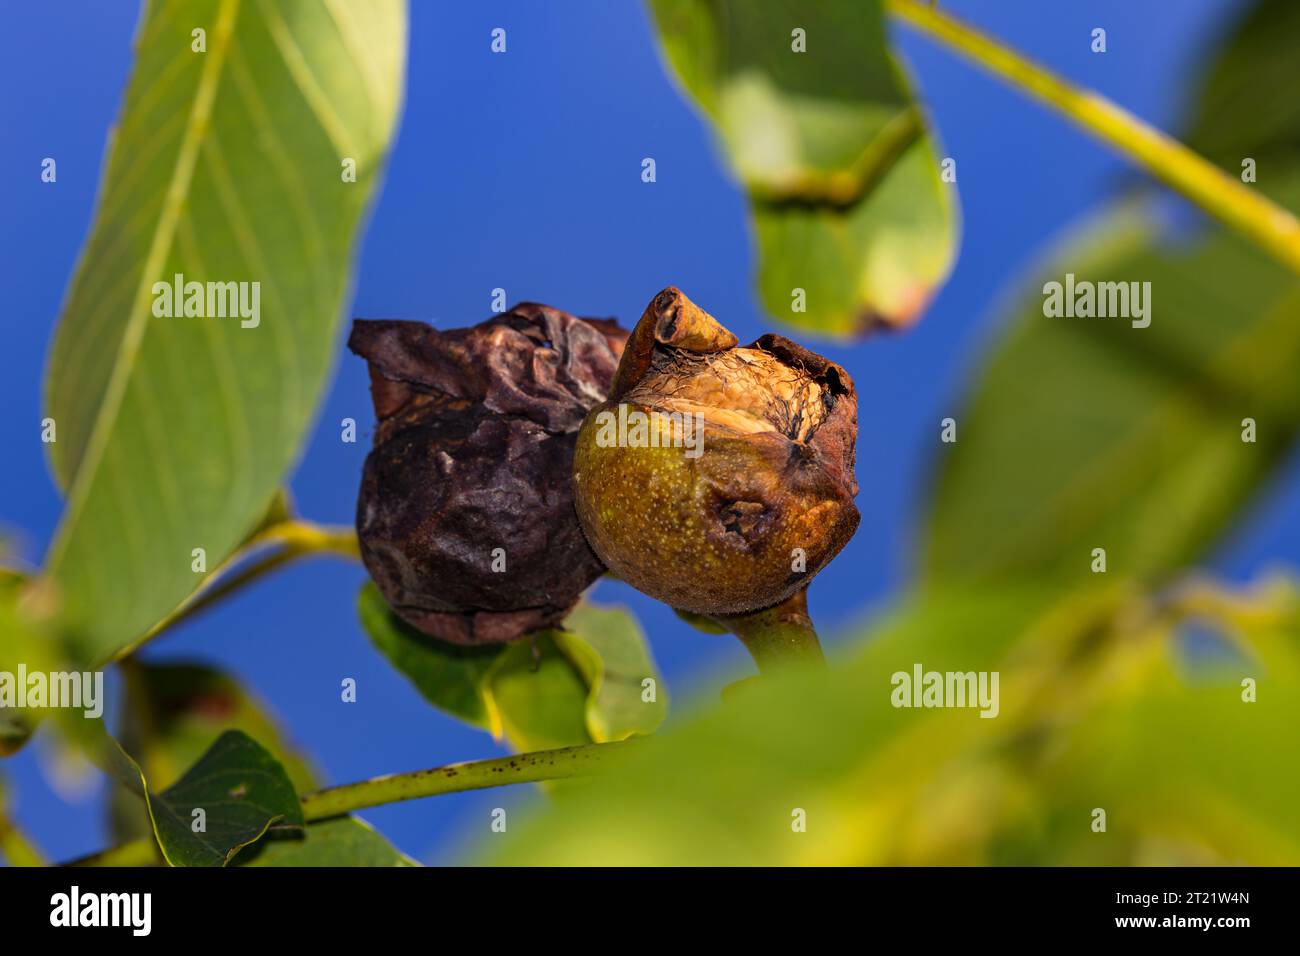 Fruit shell of walnut infested by pests on walnut tree before harvesting in autumn against blue sky Stock Photo